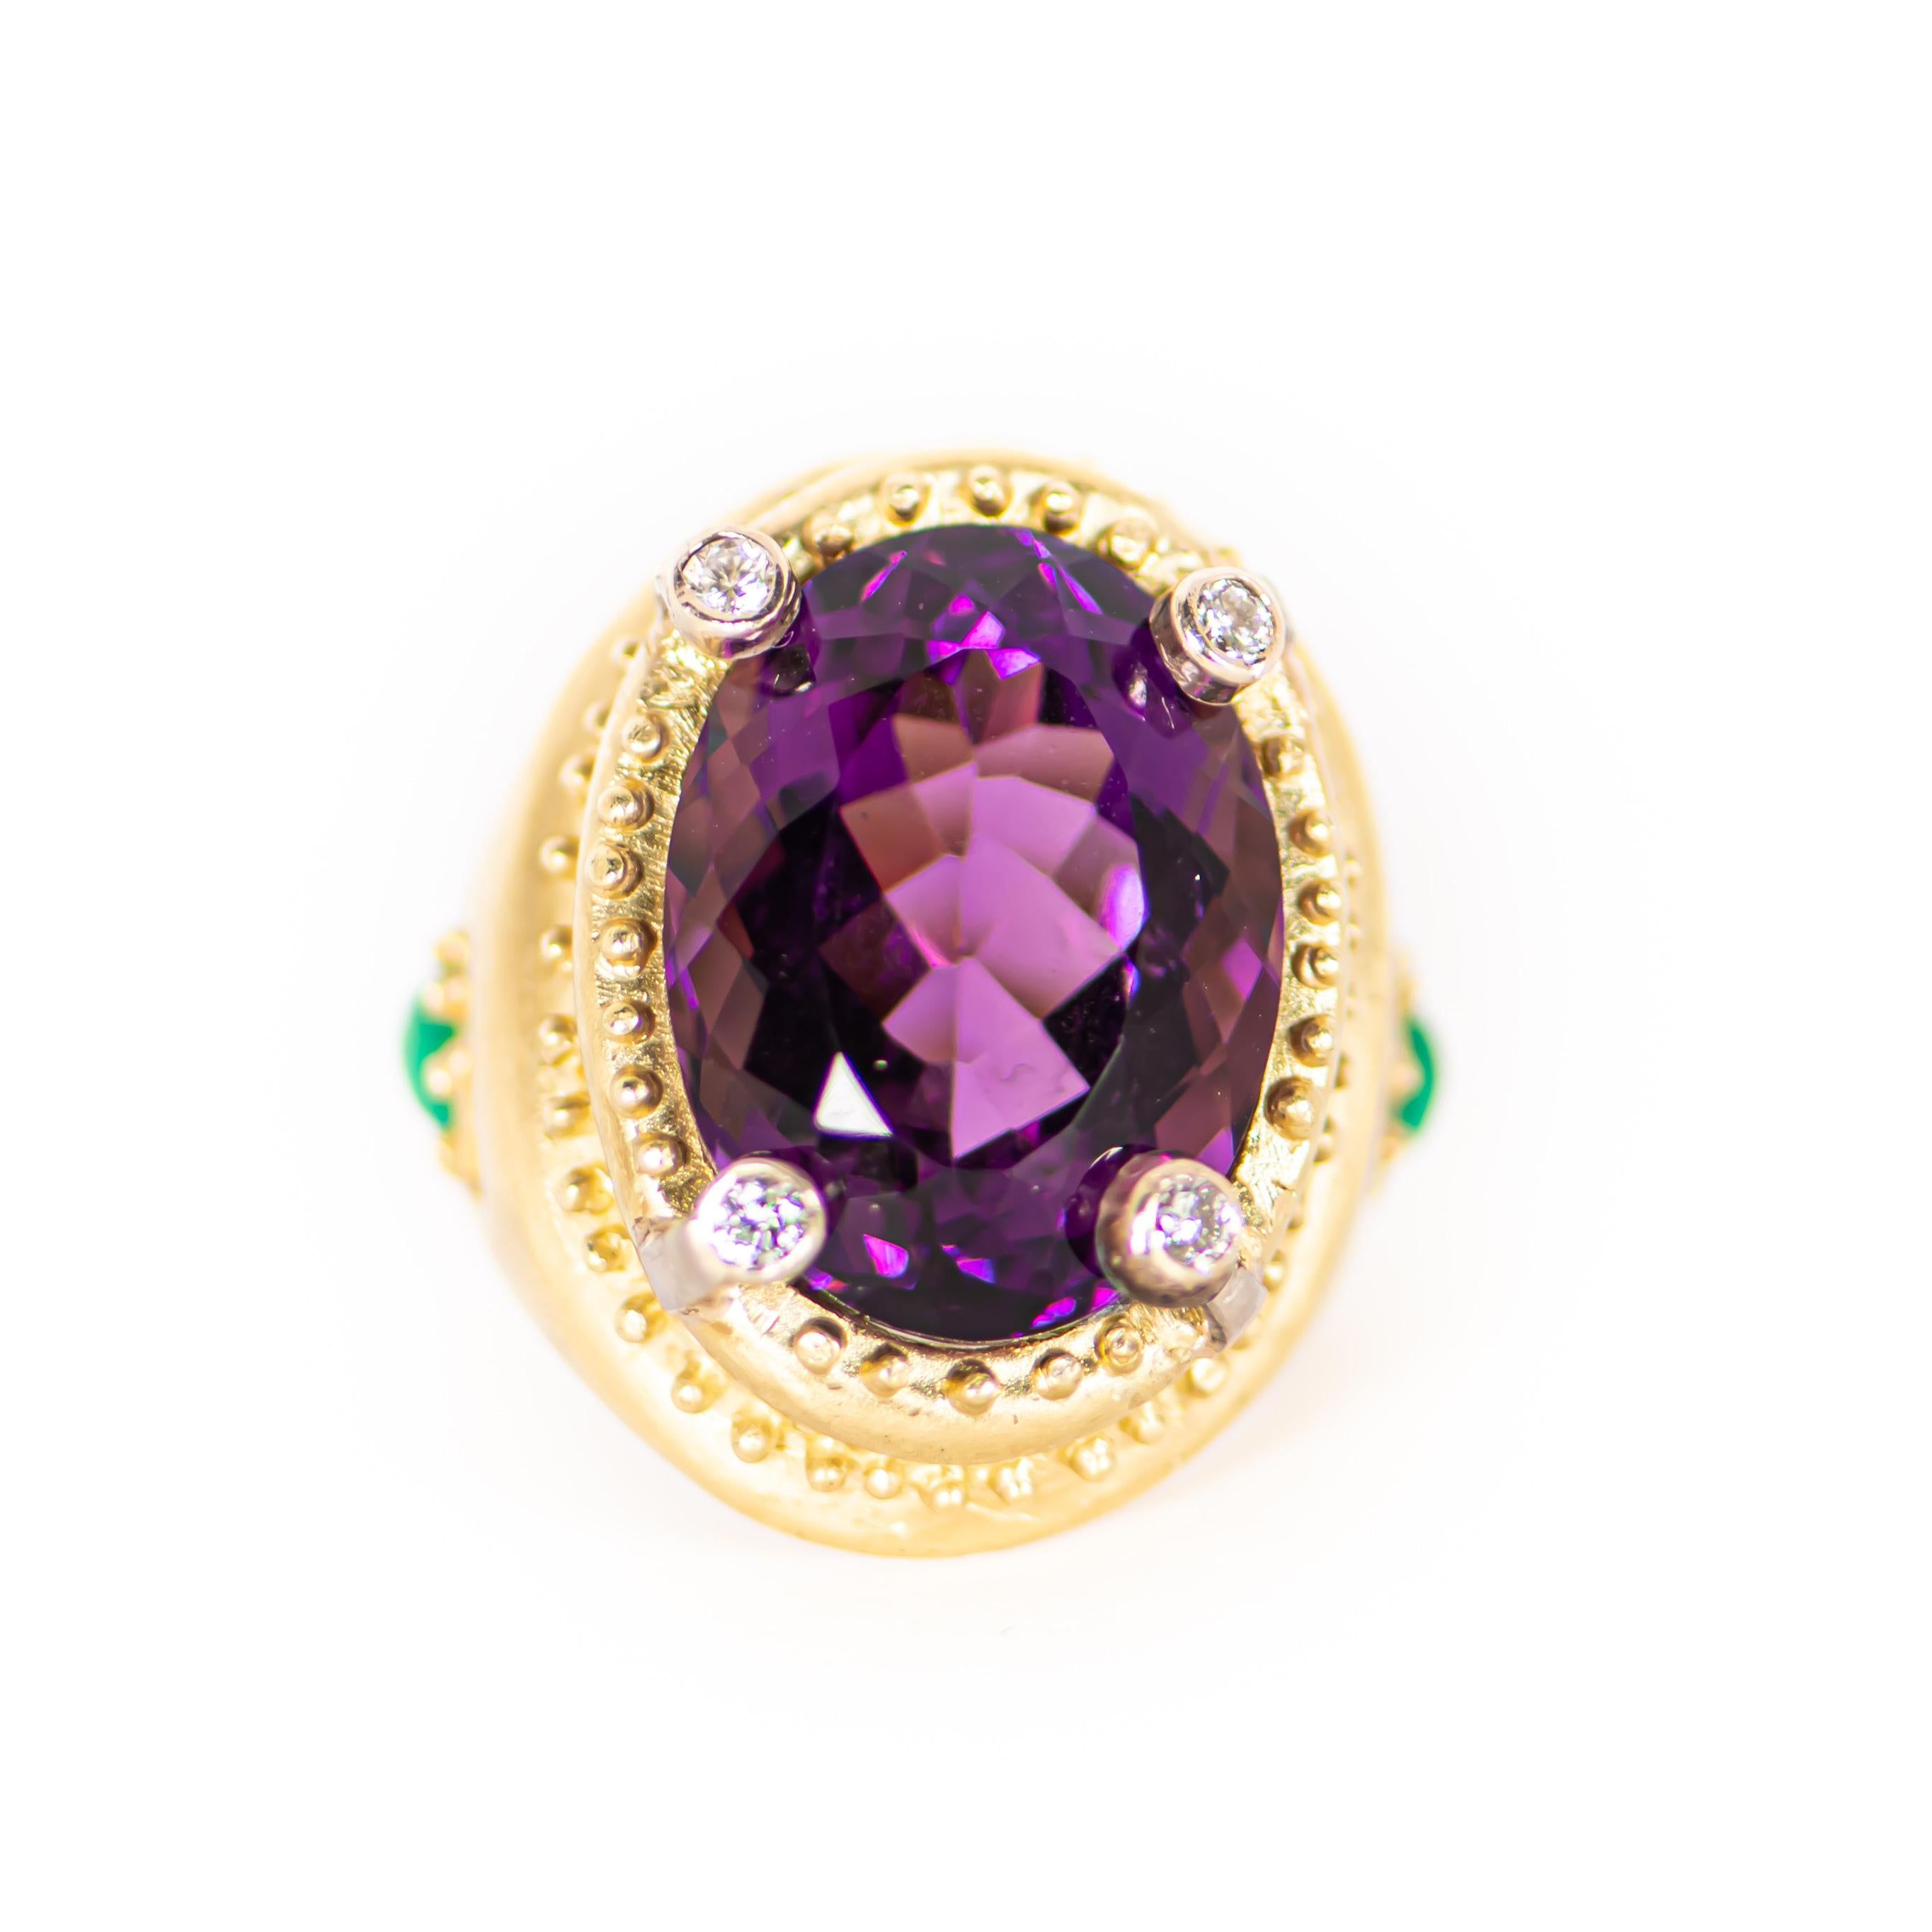 Featuring another one of a kind piece from the noted Palm Beach designer, Julia Boss!  Her clients are a laundry list of notables! Meticulously crafted in 18 karat yellow gold, this beauty features an oval, faceted purple amethyst weighing an